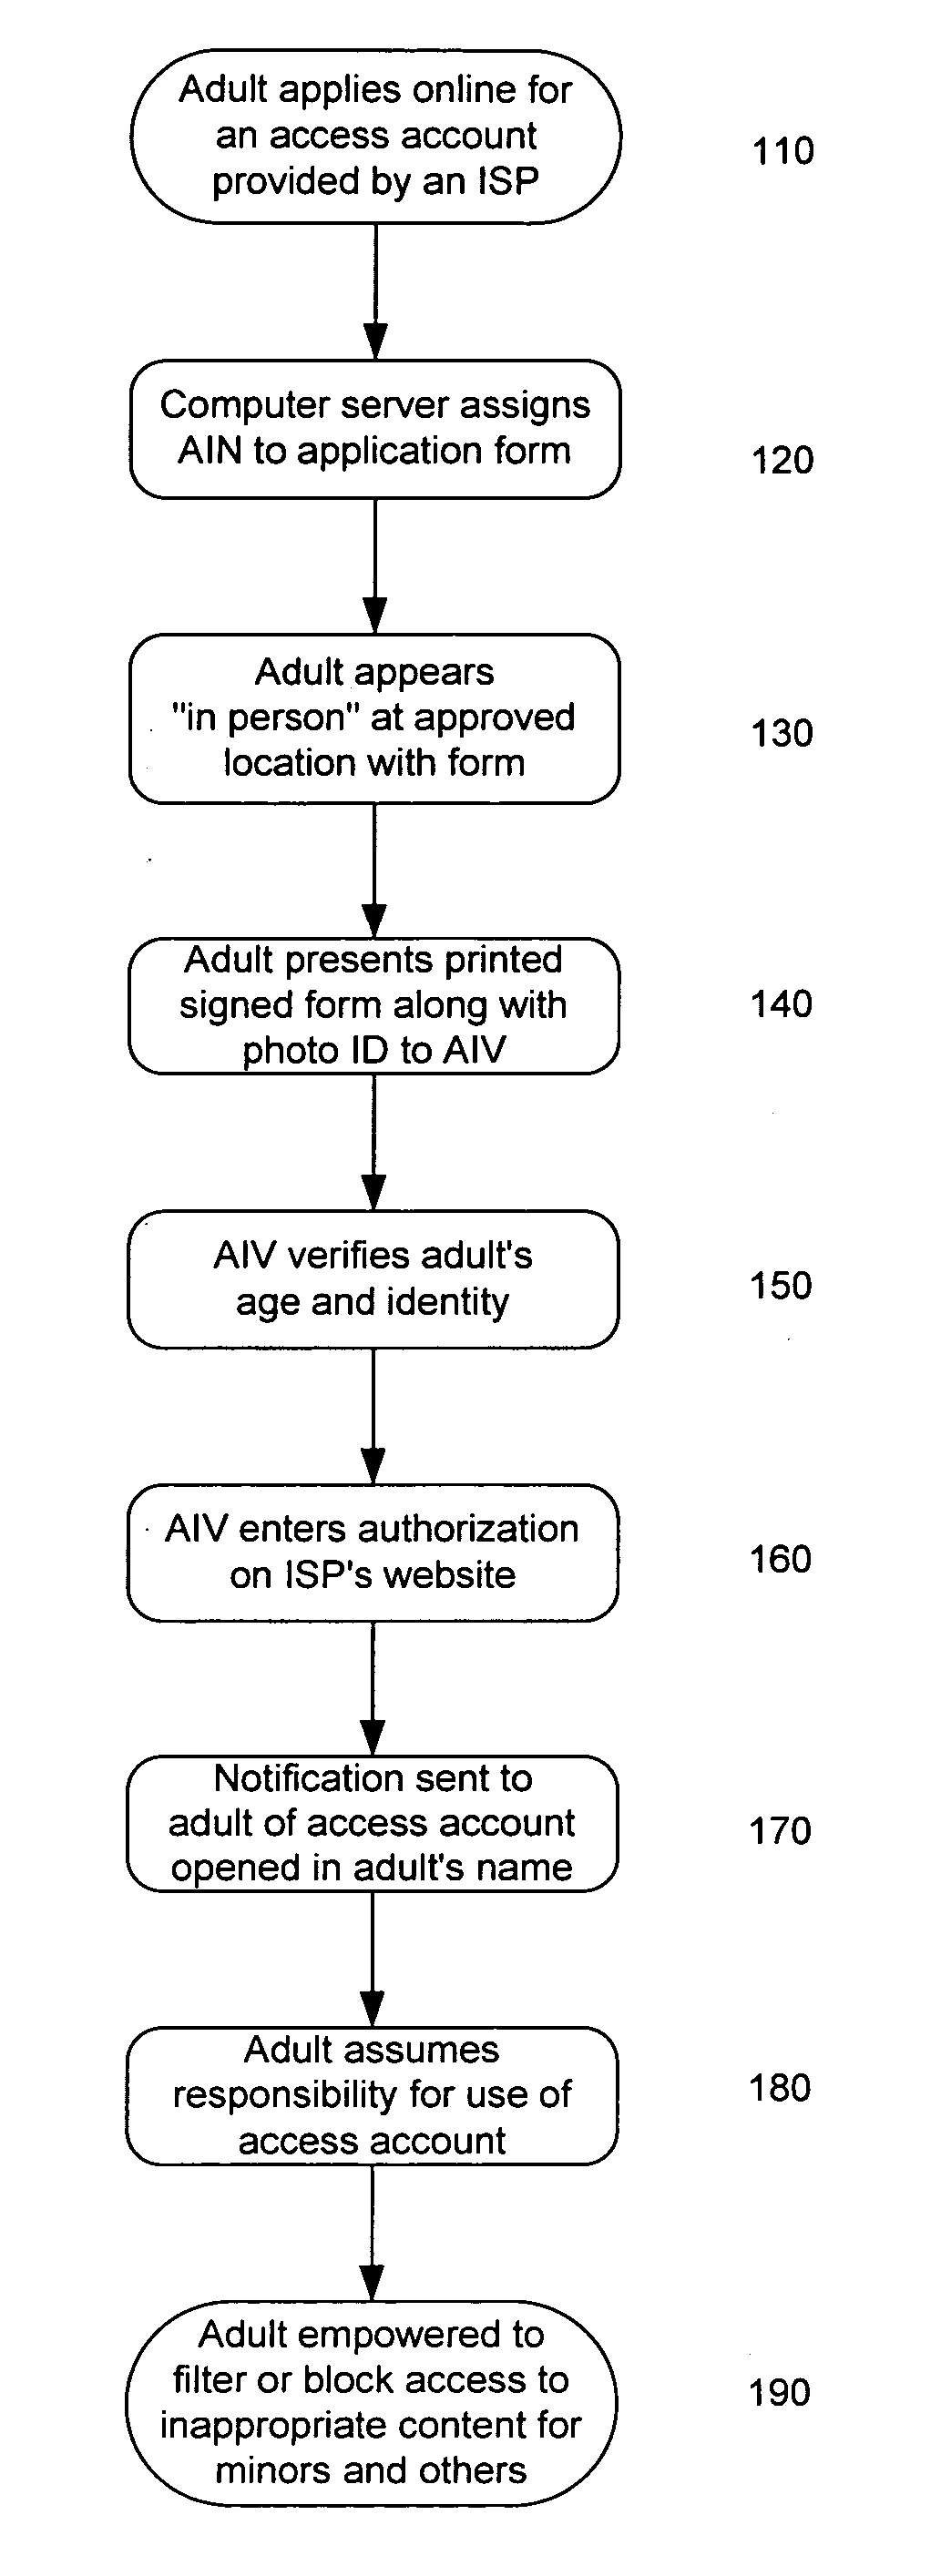 System and method for verifying the age and identity of individuals and limiting their access to appropriate material and situations